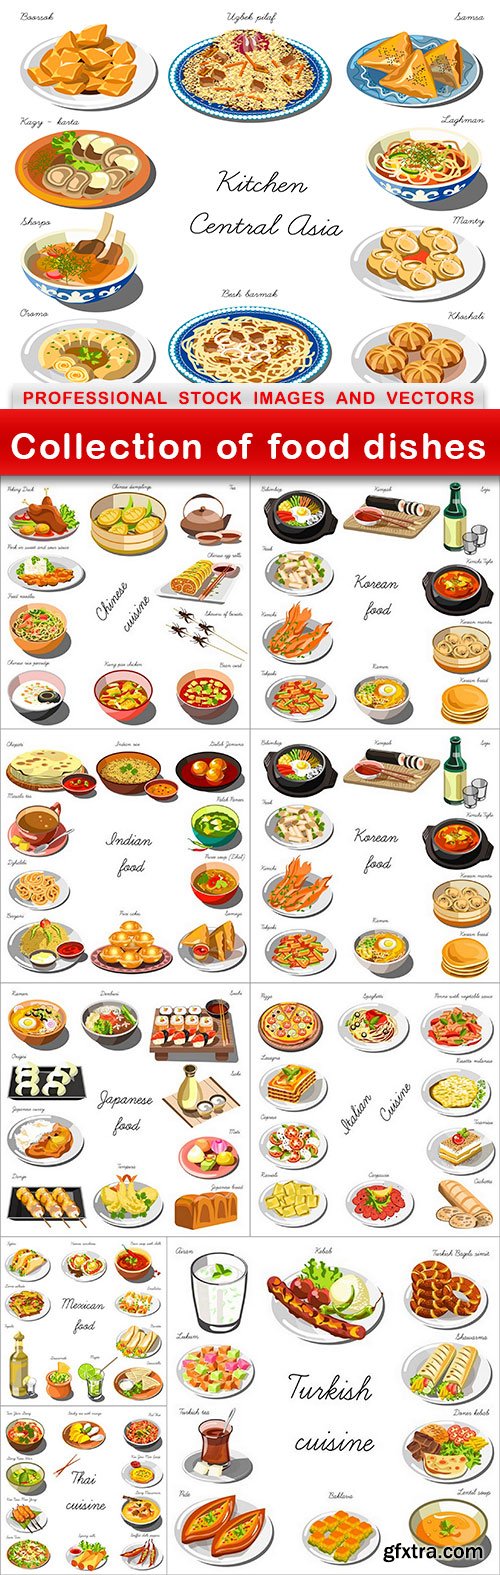 Collection of food dishes - 10 EPS